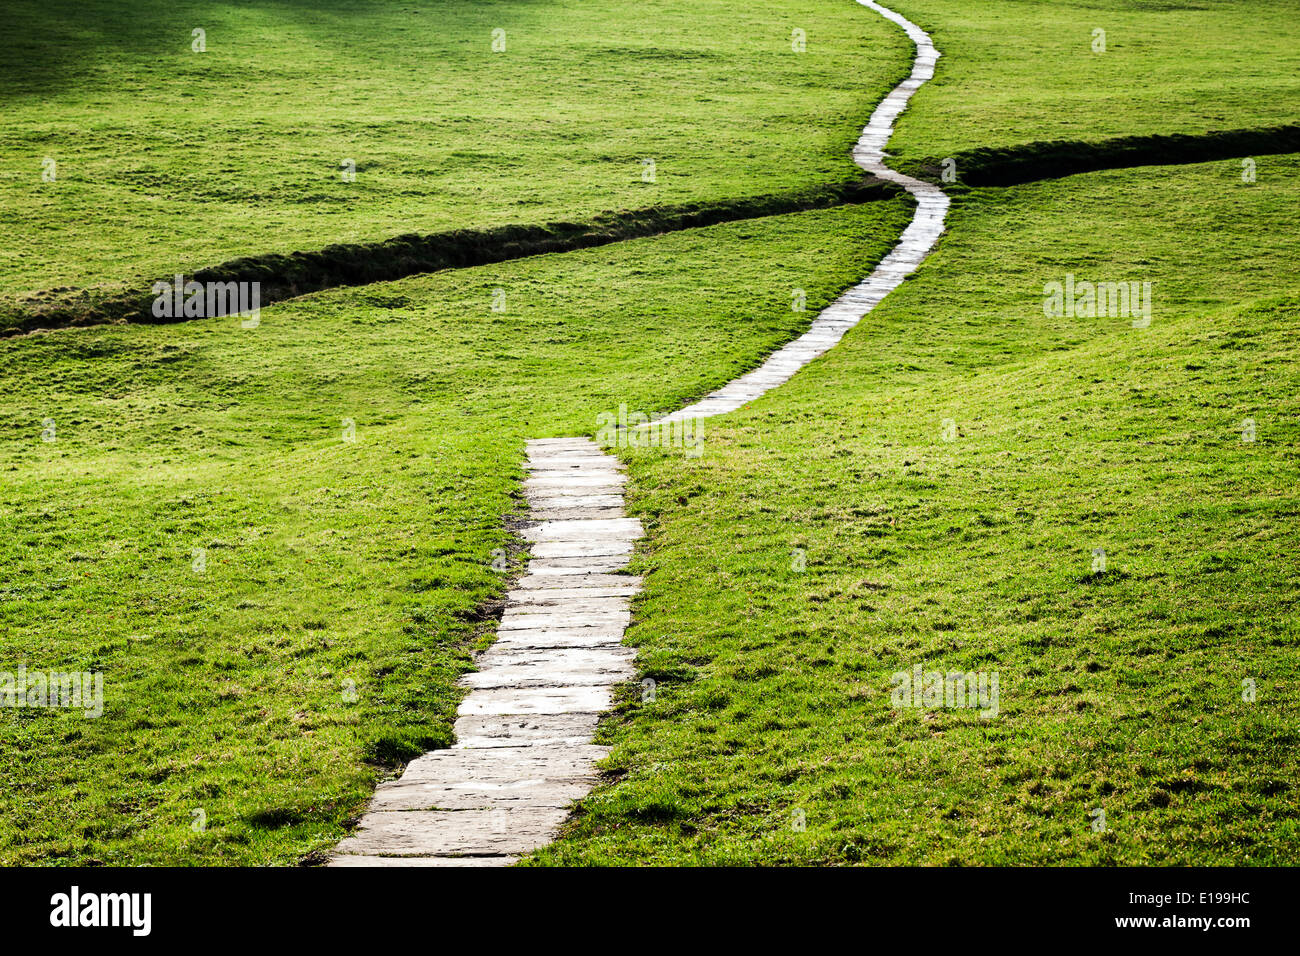 A long flagstone pathway snaking through a grassy field in the Yorkshire Dales, England, UK. Stock Photo